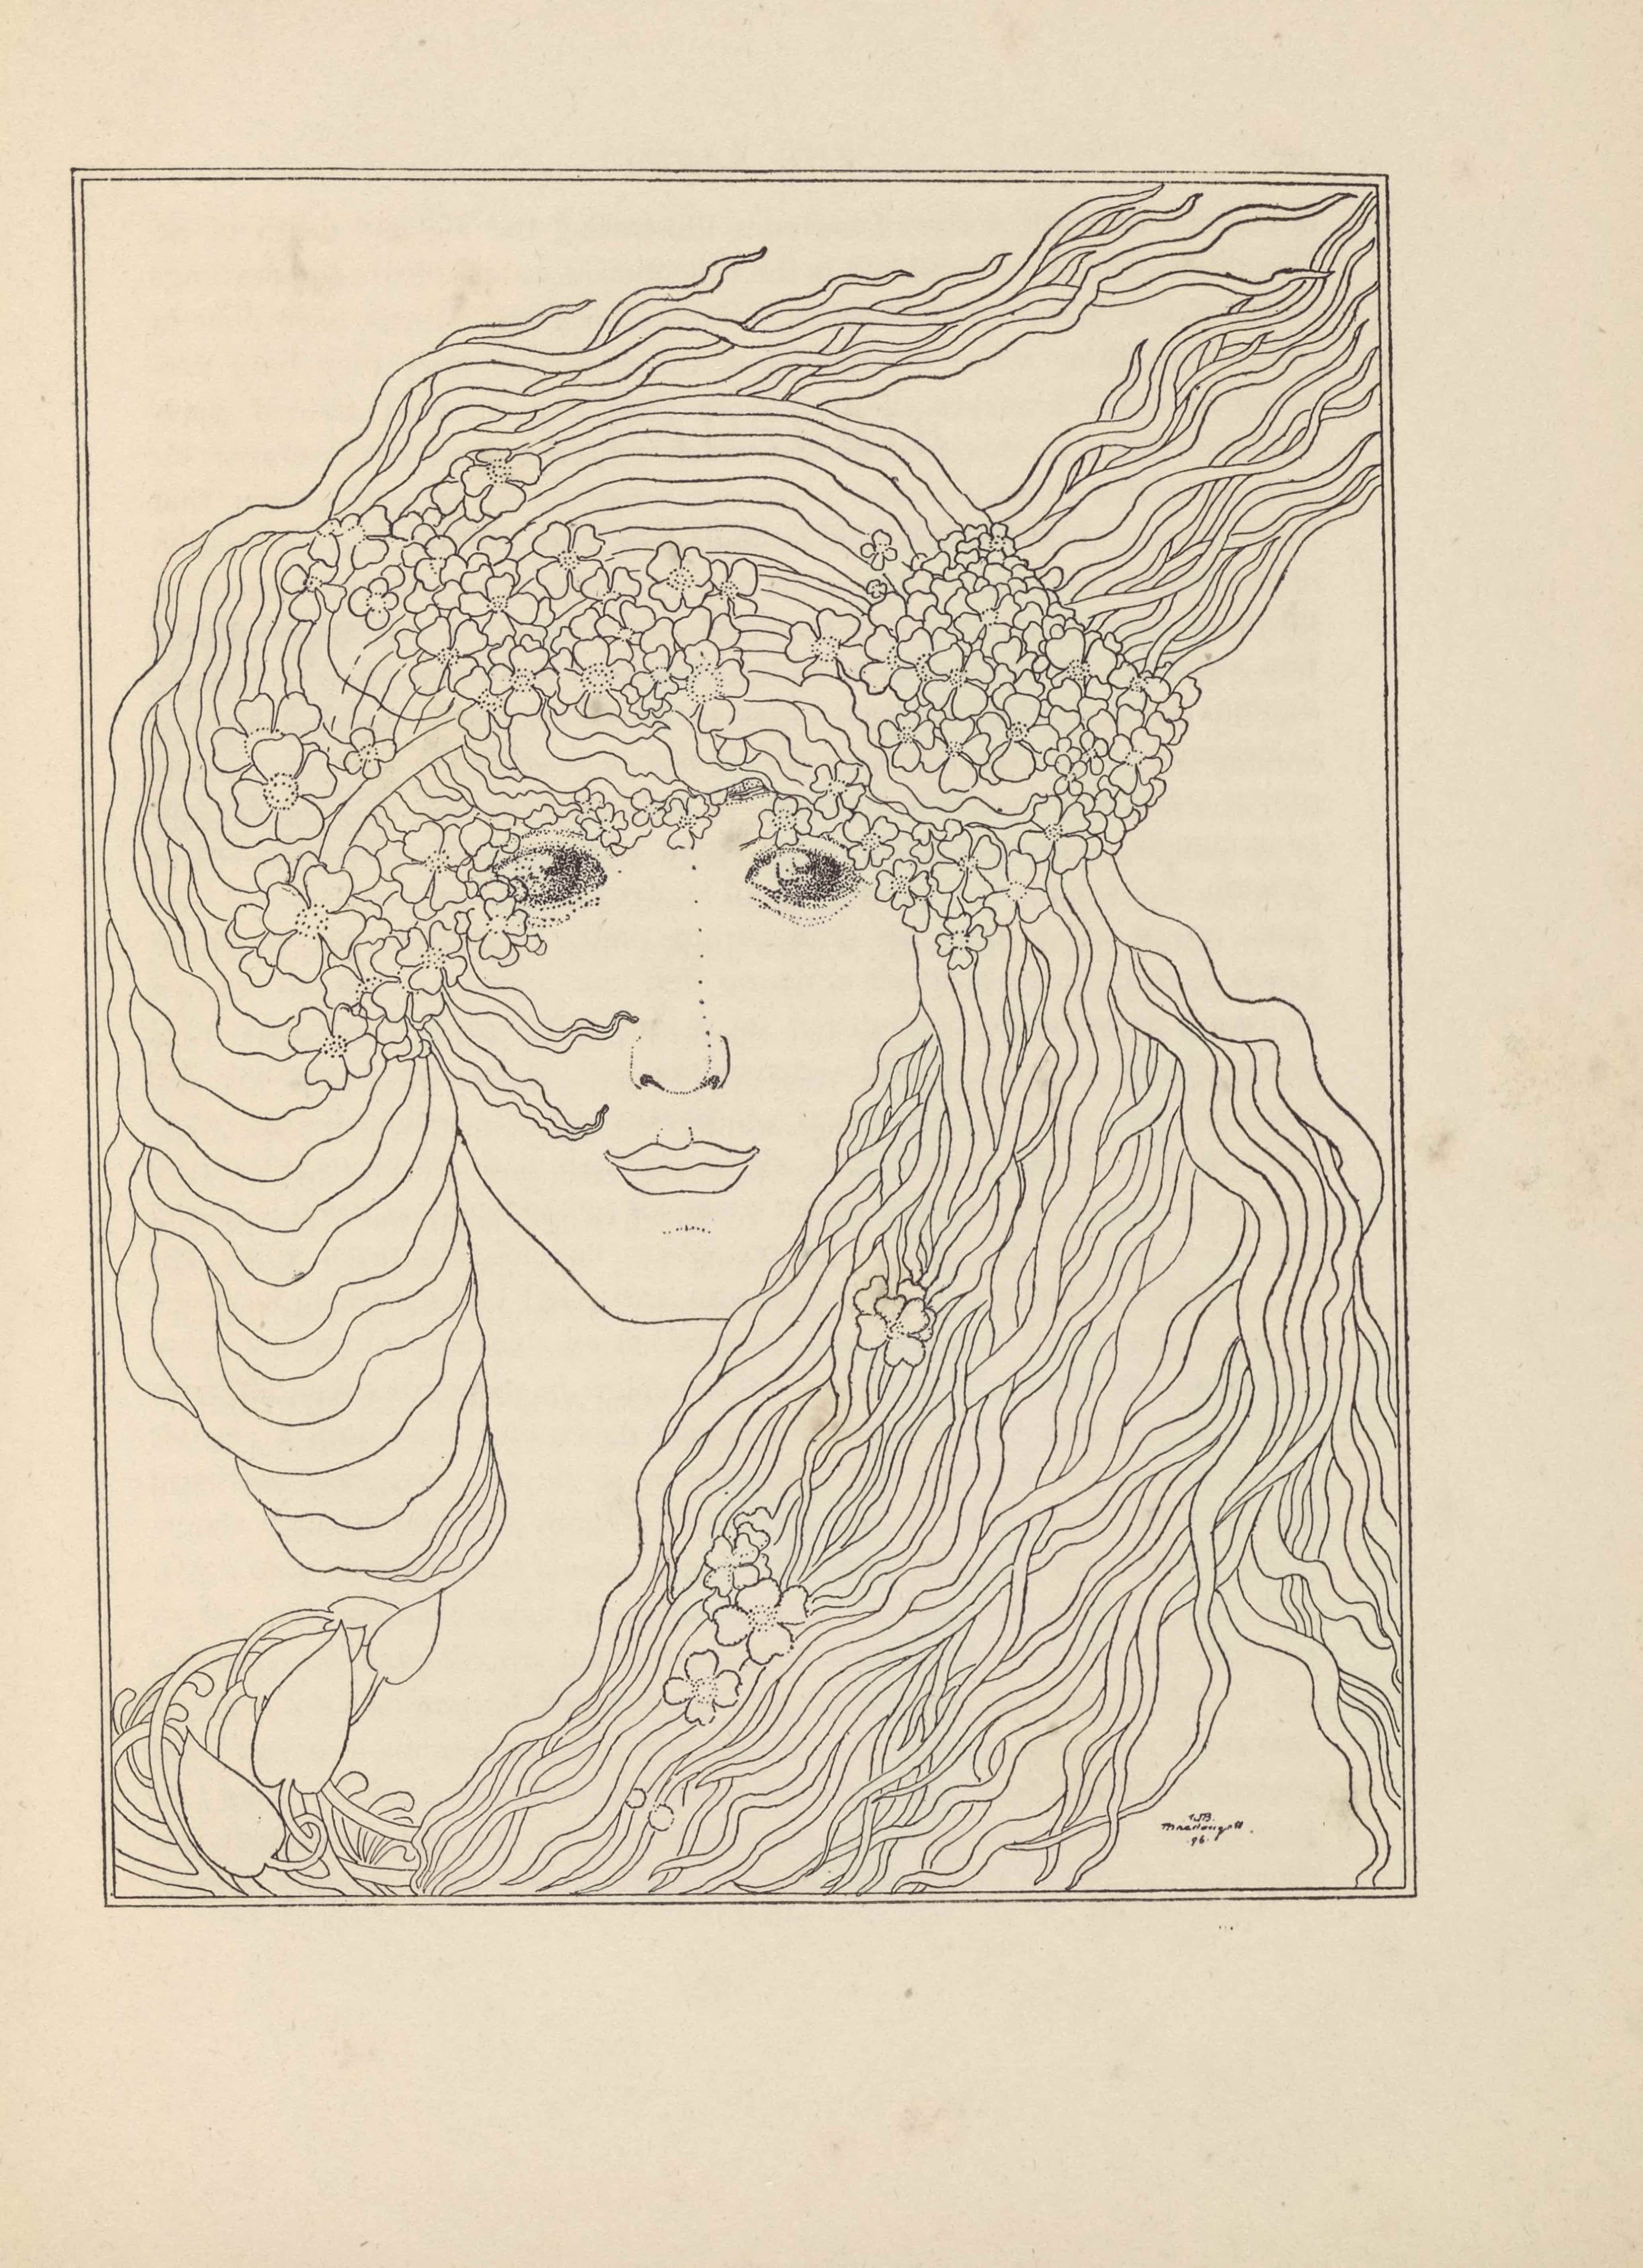 The line-block reproduction of a pen-and-ink drawing by W. B. Macdougall is in portrait orientation and bordered by a double lined rectangular frame. The light line drawing depicts a woman facing forward, showing her face, hair, and neck. Her hair is made of thick wavy strands, framing her left jaw and crossing in front of her neck before curving around her right shoulder. The hair resting on her right shoulder ends in flower petals. The hair on the right side of her head curves up and around the back of her head flowing off into the top right corner of the image. Clustered in her hair around the crown of her head are garlands of four-leaf clovers or four-petaled flowers; there are a few more lower down in her hair as well. Her eyes are sketched via stippling and in this way stand out from the rest of the drawing which is linear. There is a signature at the bottom-right of the image: “WB Macdougall.” Beneath the name is the number 96 with a dot on the left and right sides.